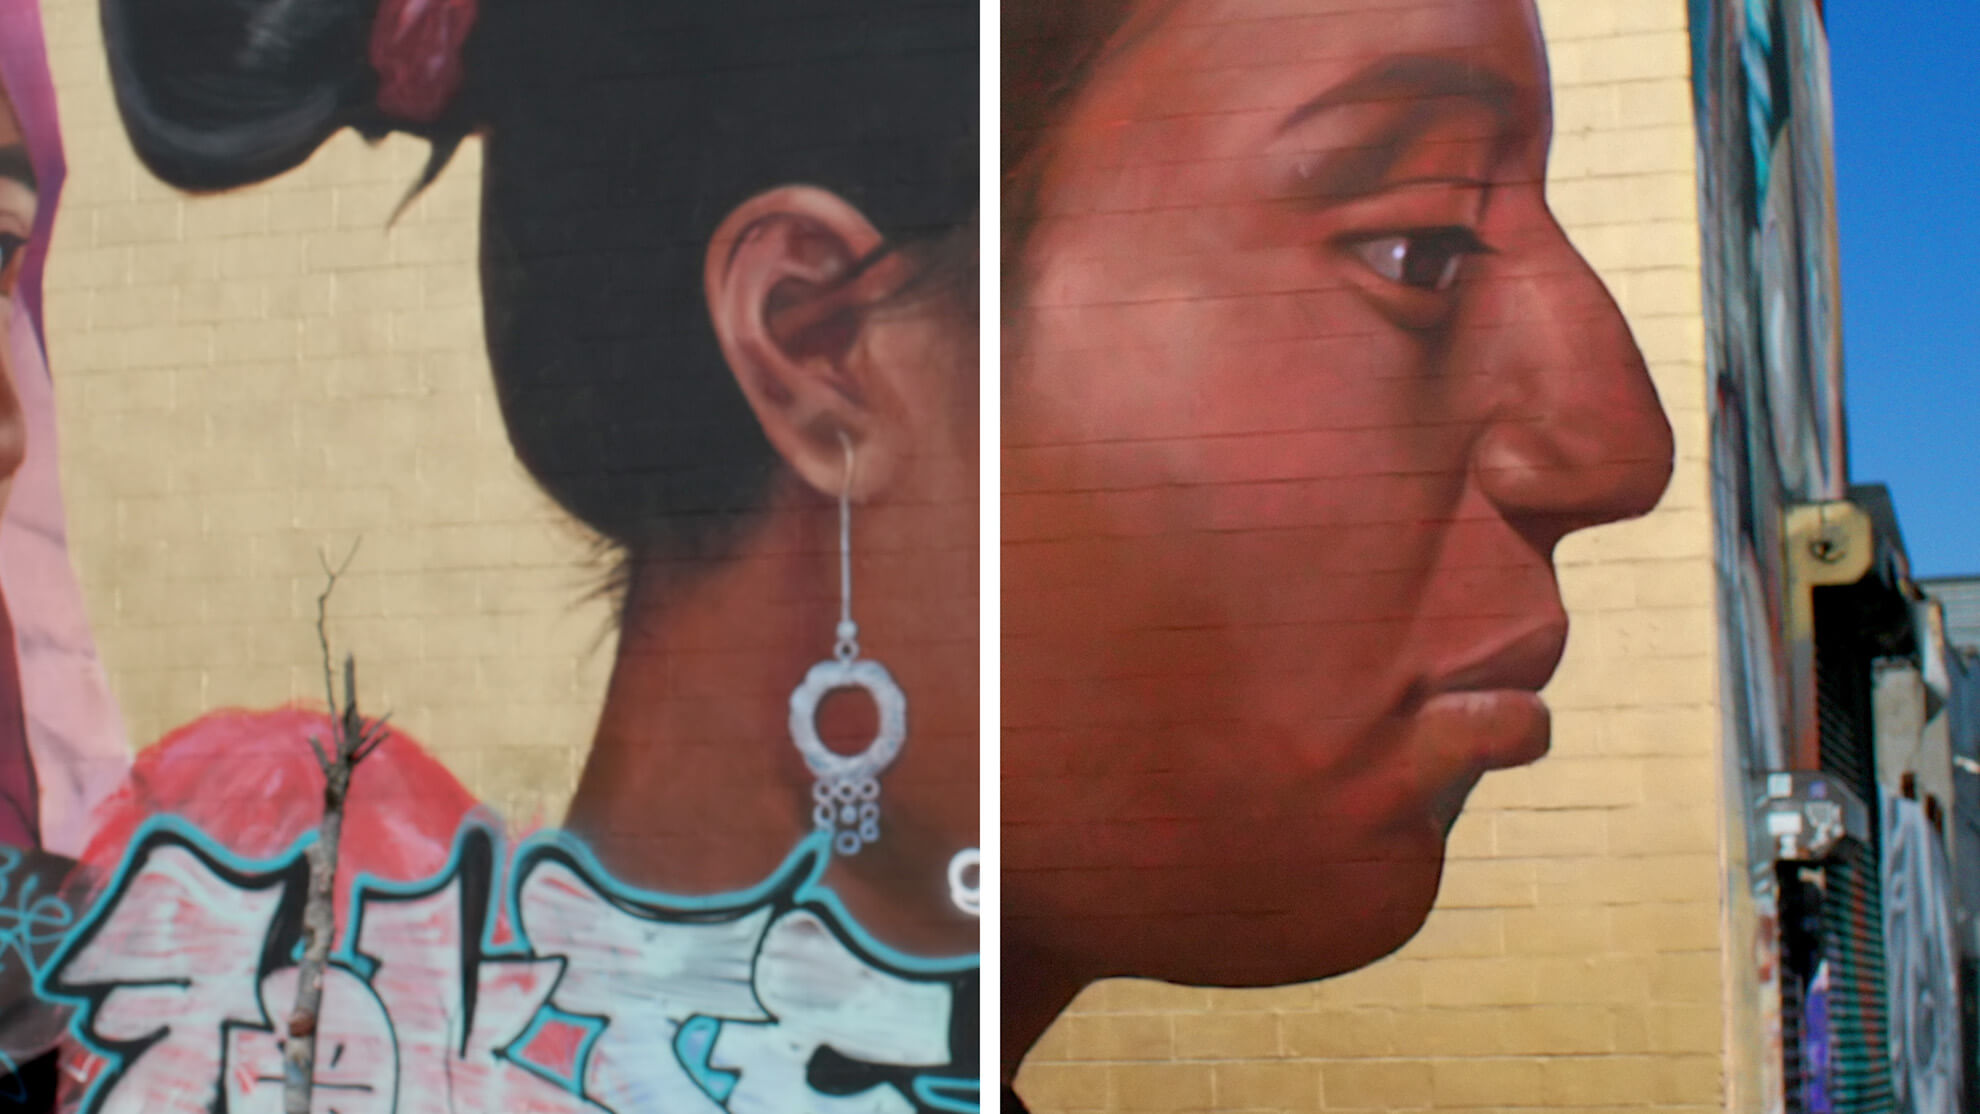 A side-by-side comparison of the mural before and after its mending. The mended mural is on the right and has deeper, richer colors and no obscuring graffiti.